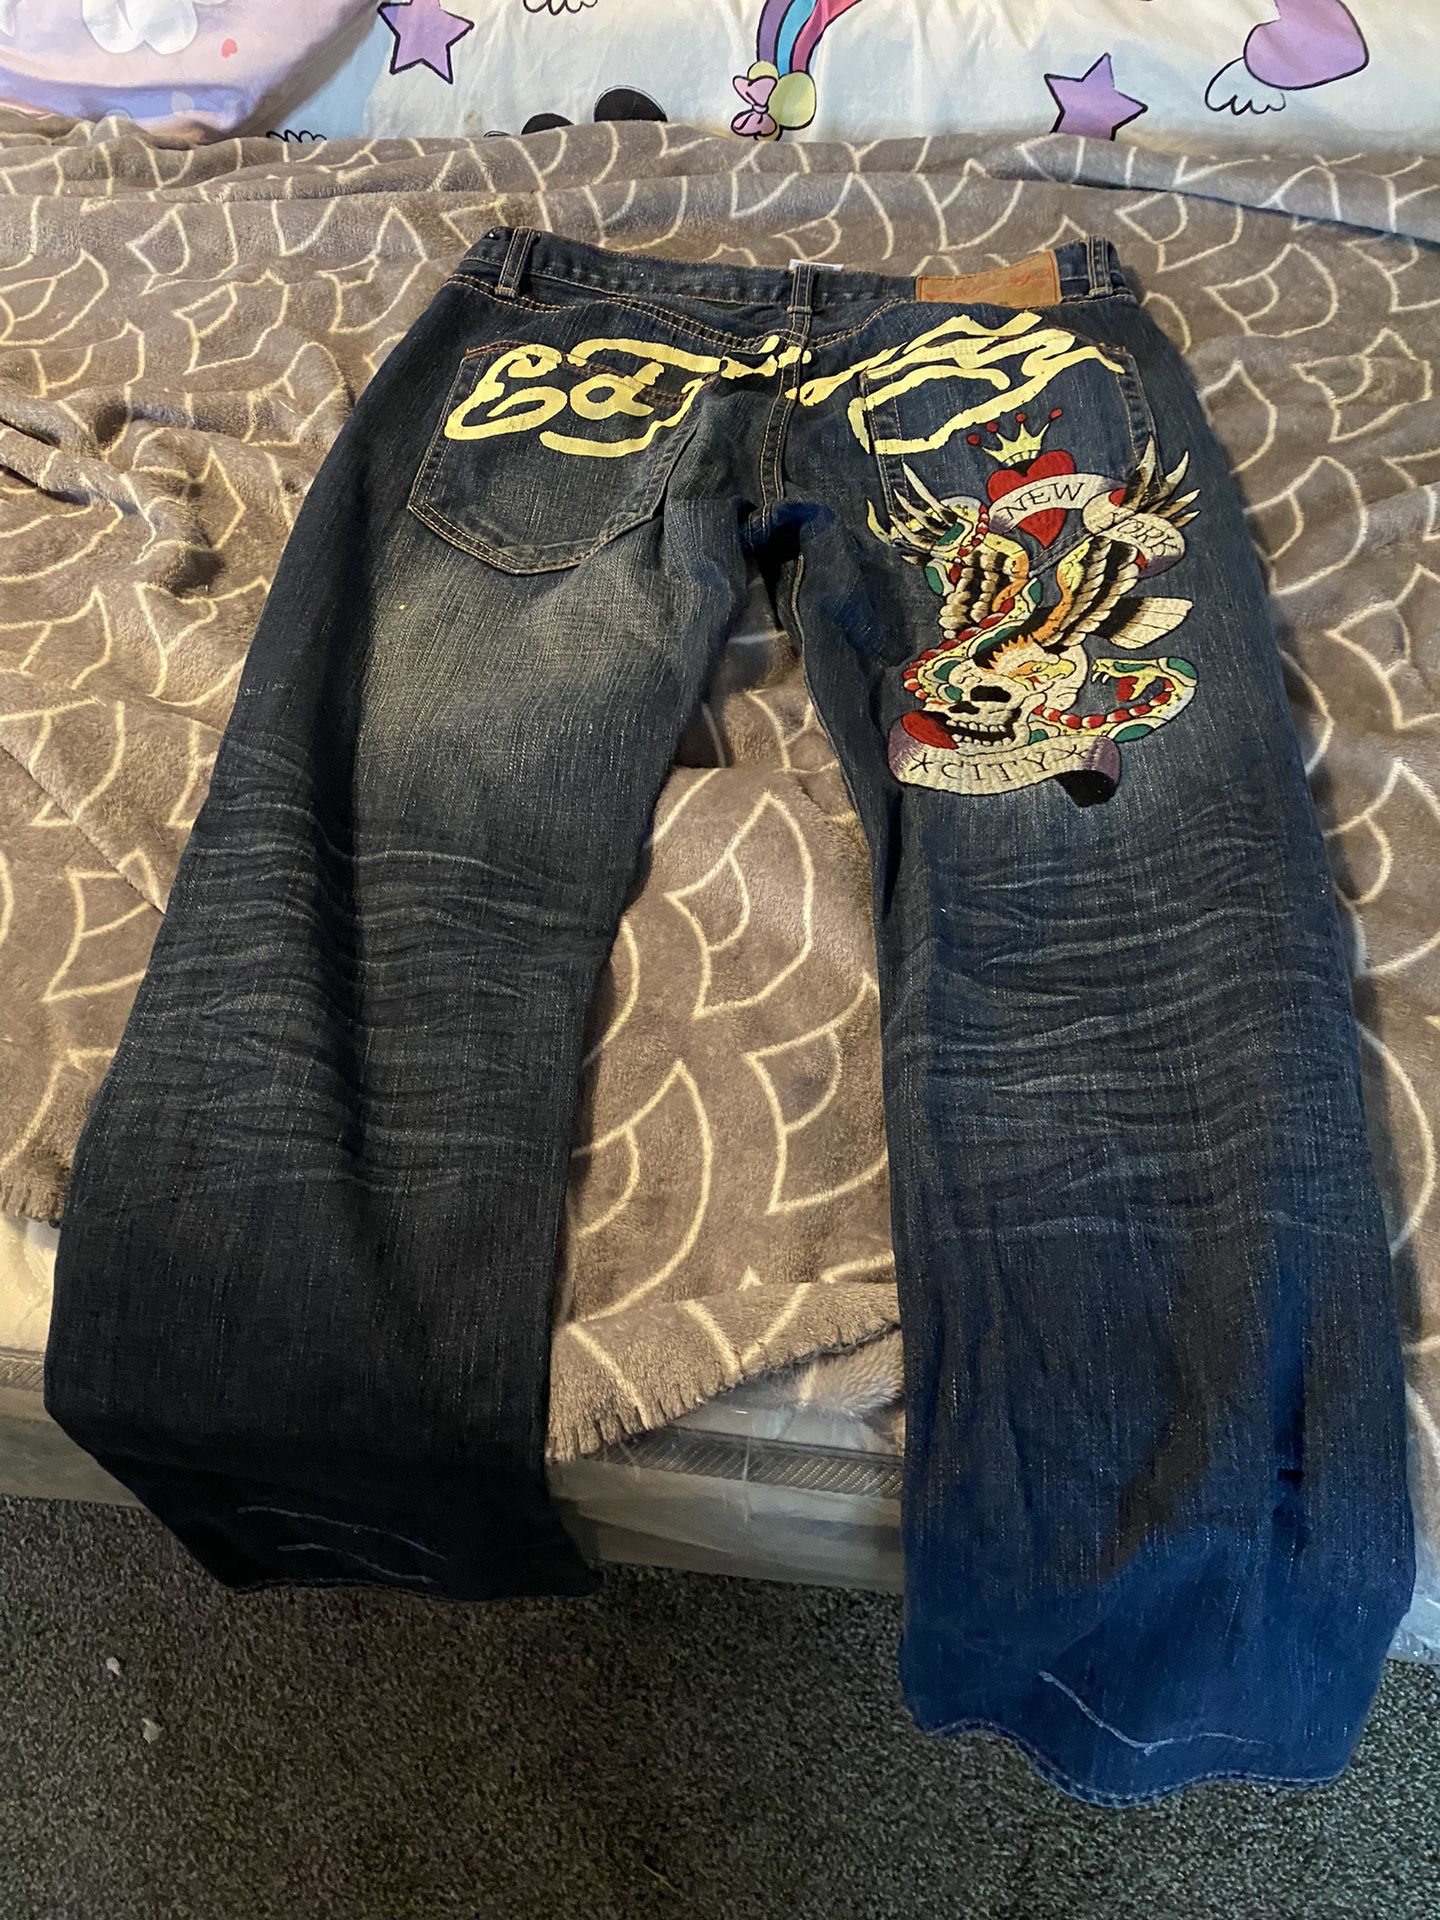 Vintage Ed Hardy by Christian Audigier Painted Spellout Denim Y2K Jeans 33x32